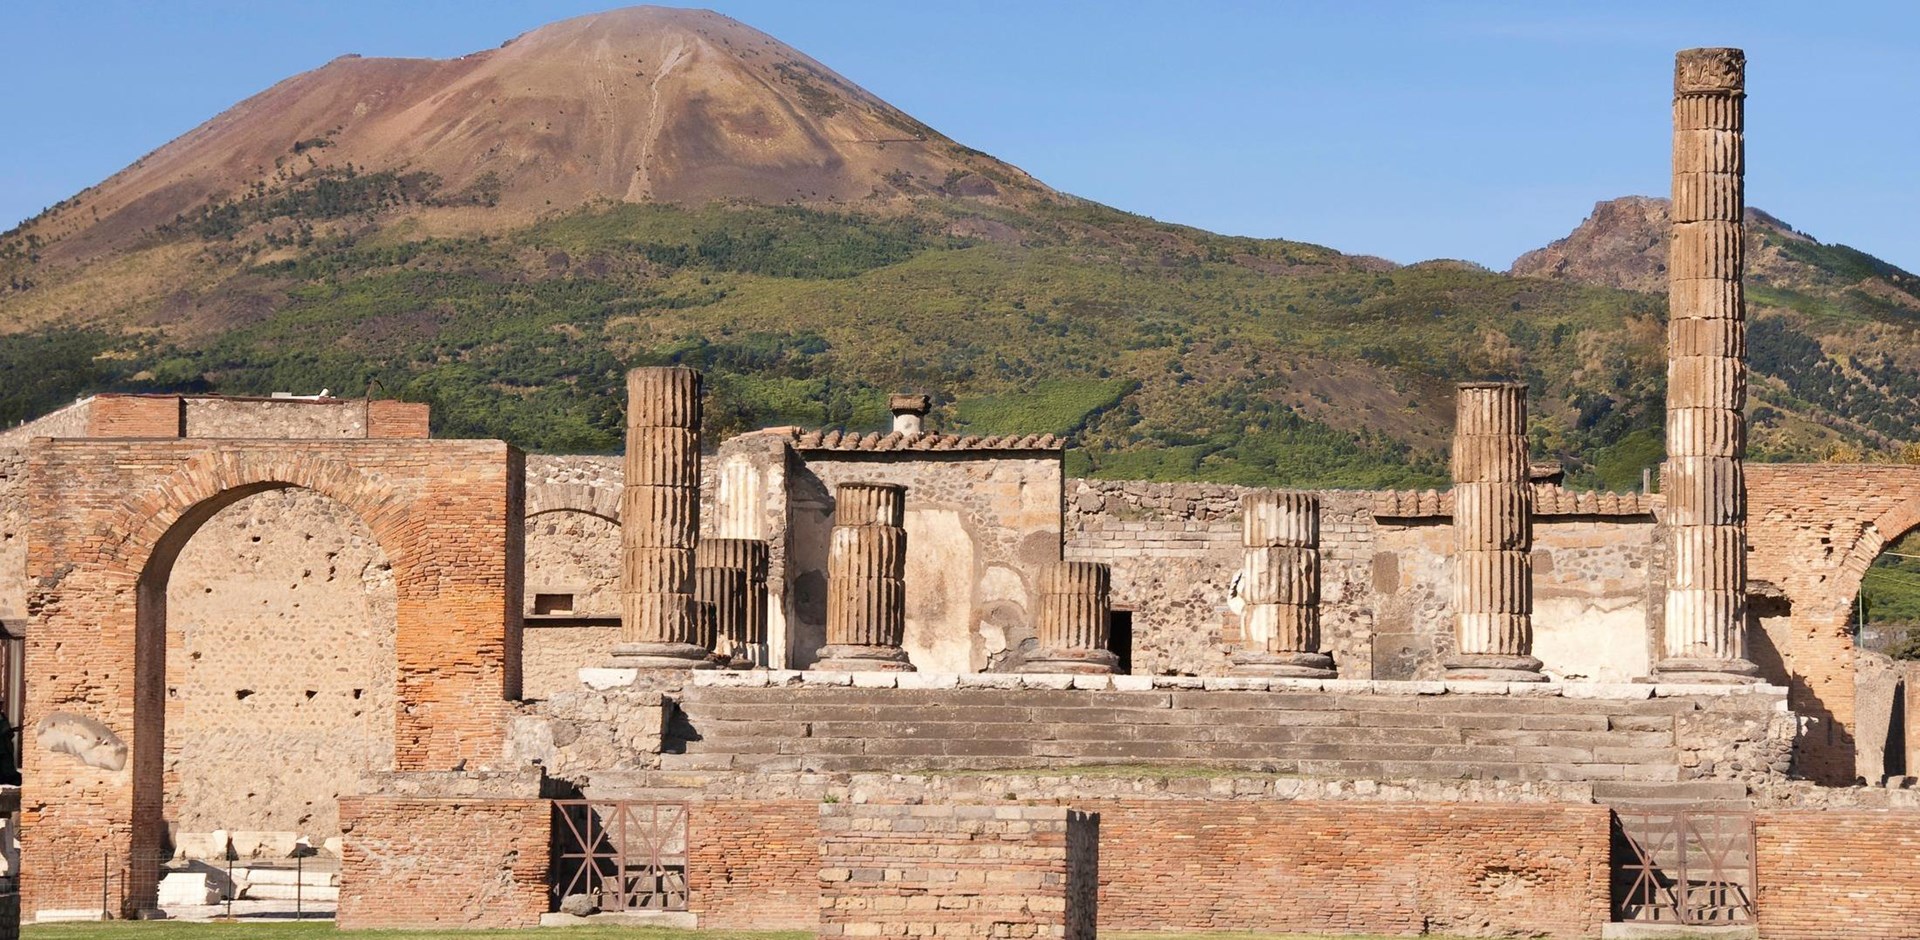 The temple of Jupiter with Mount Vesuvius lying dormant in the background.